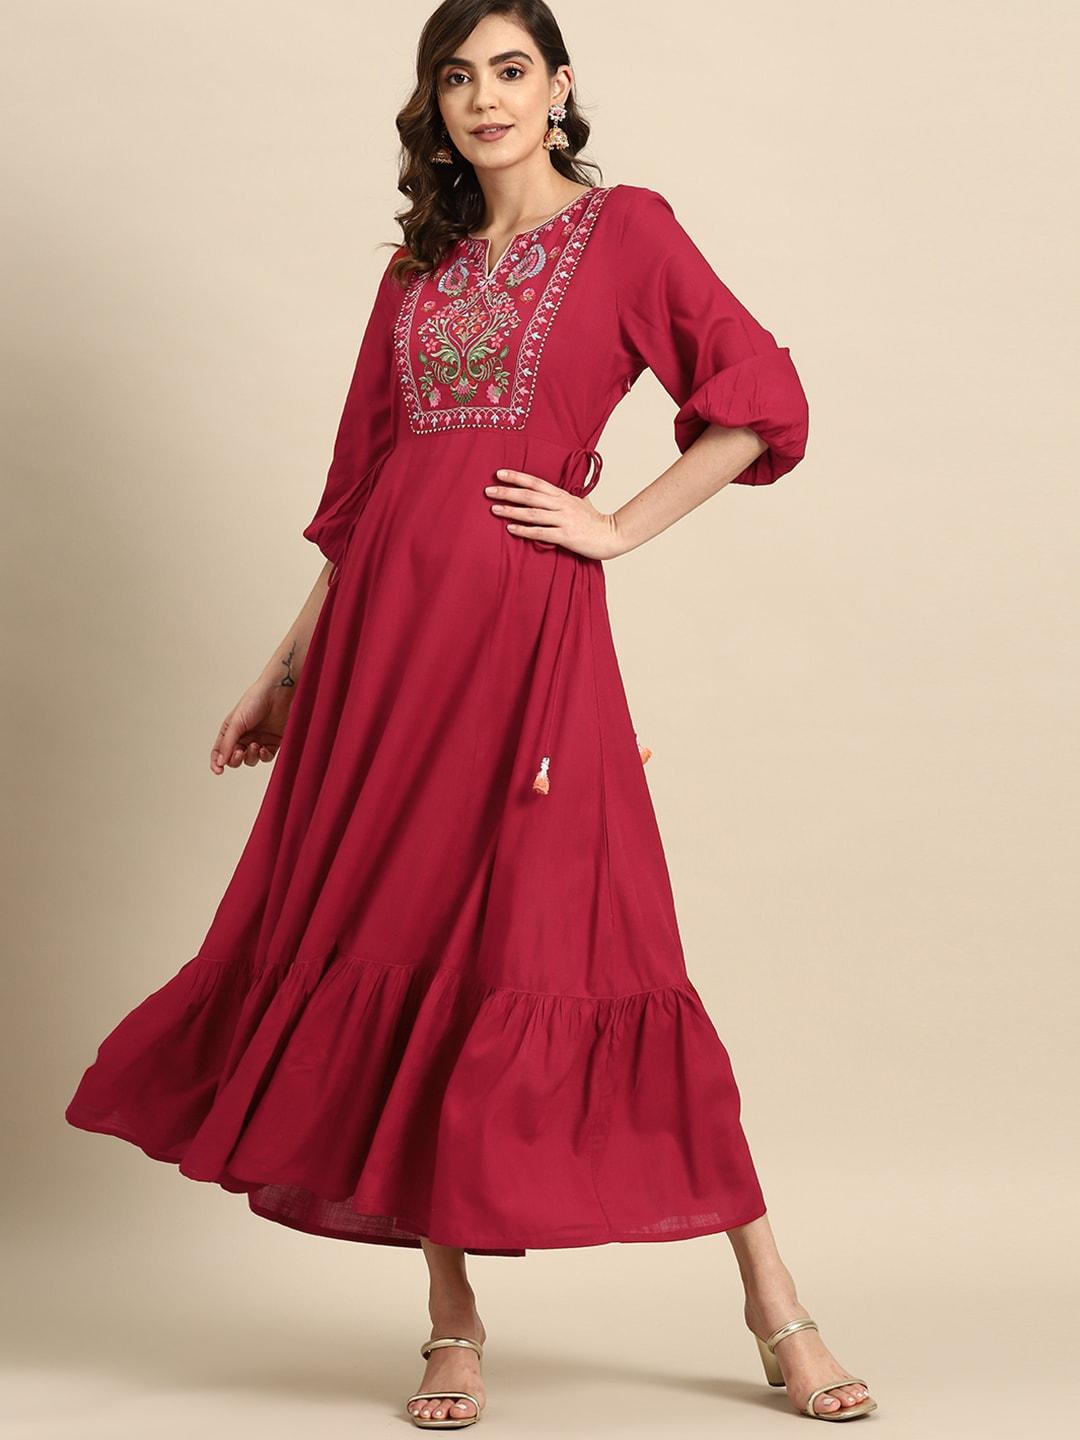 all-about-you-yoke-embroidered-tiered-maxi-ethnic-dress